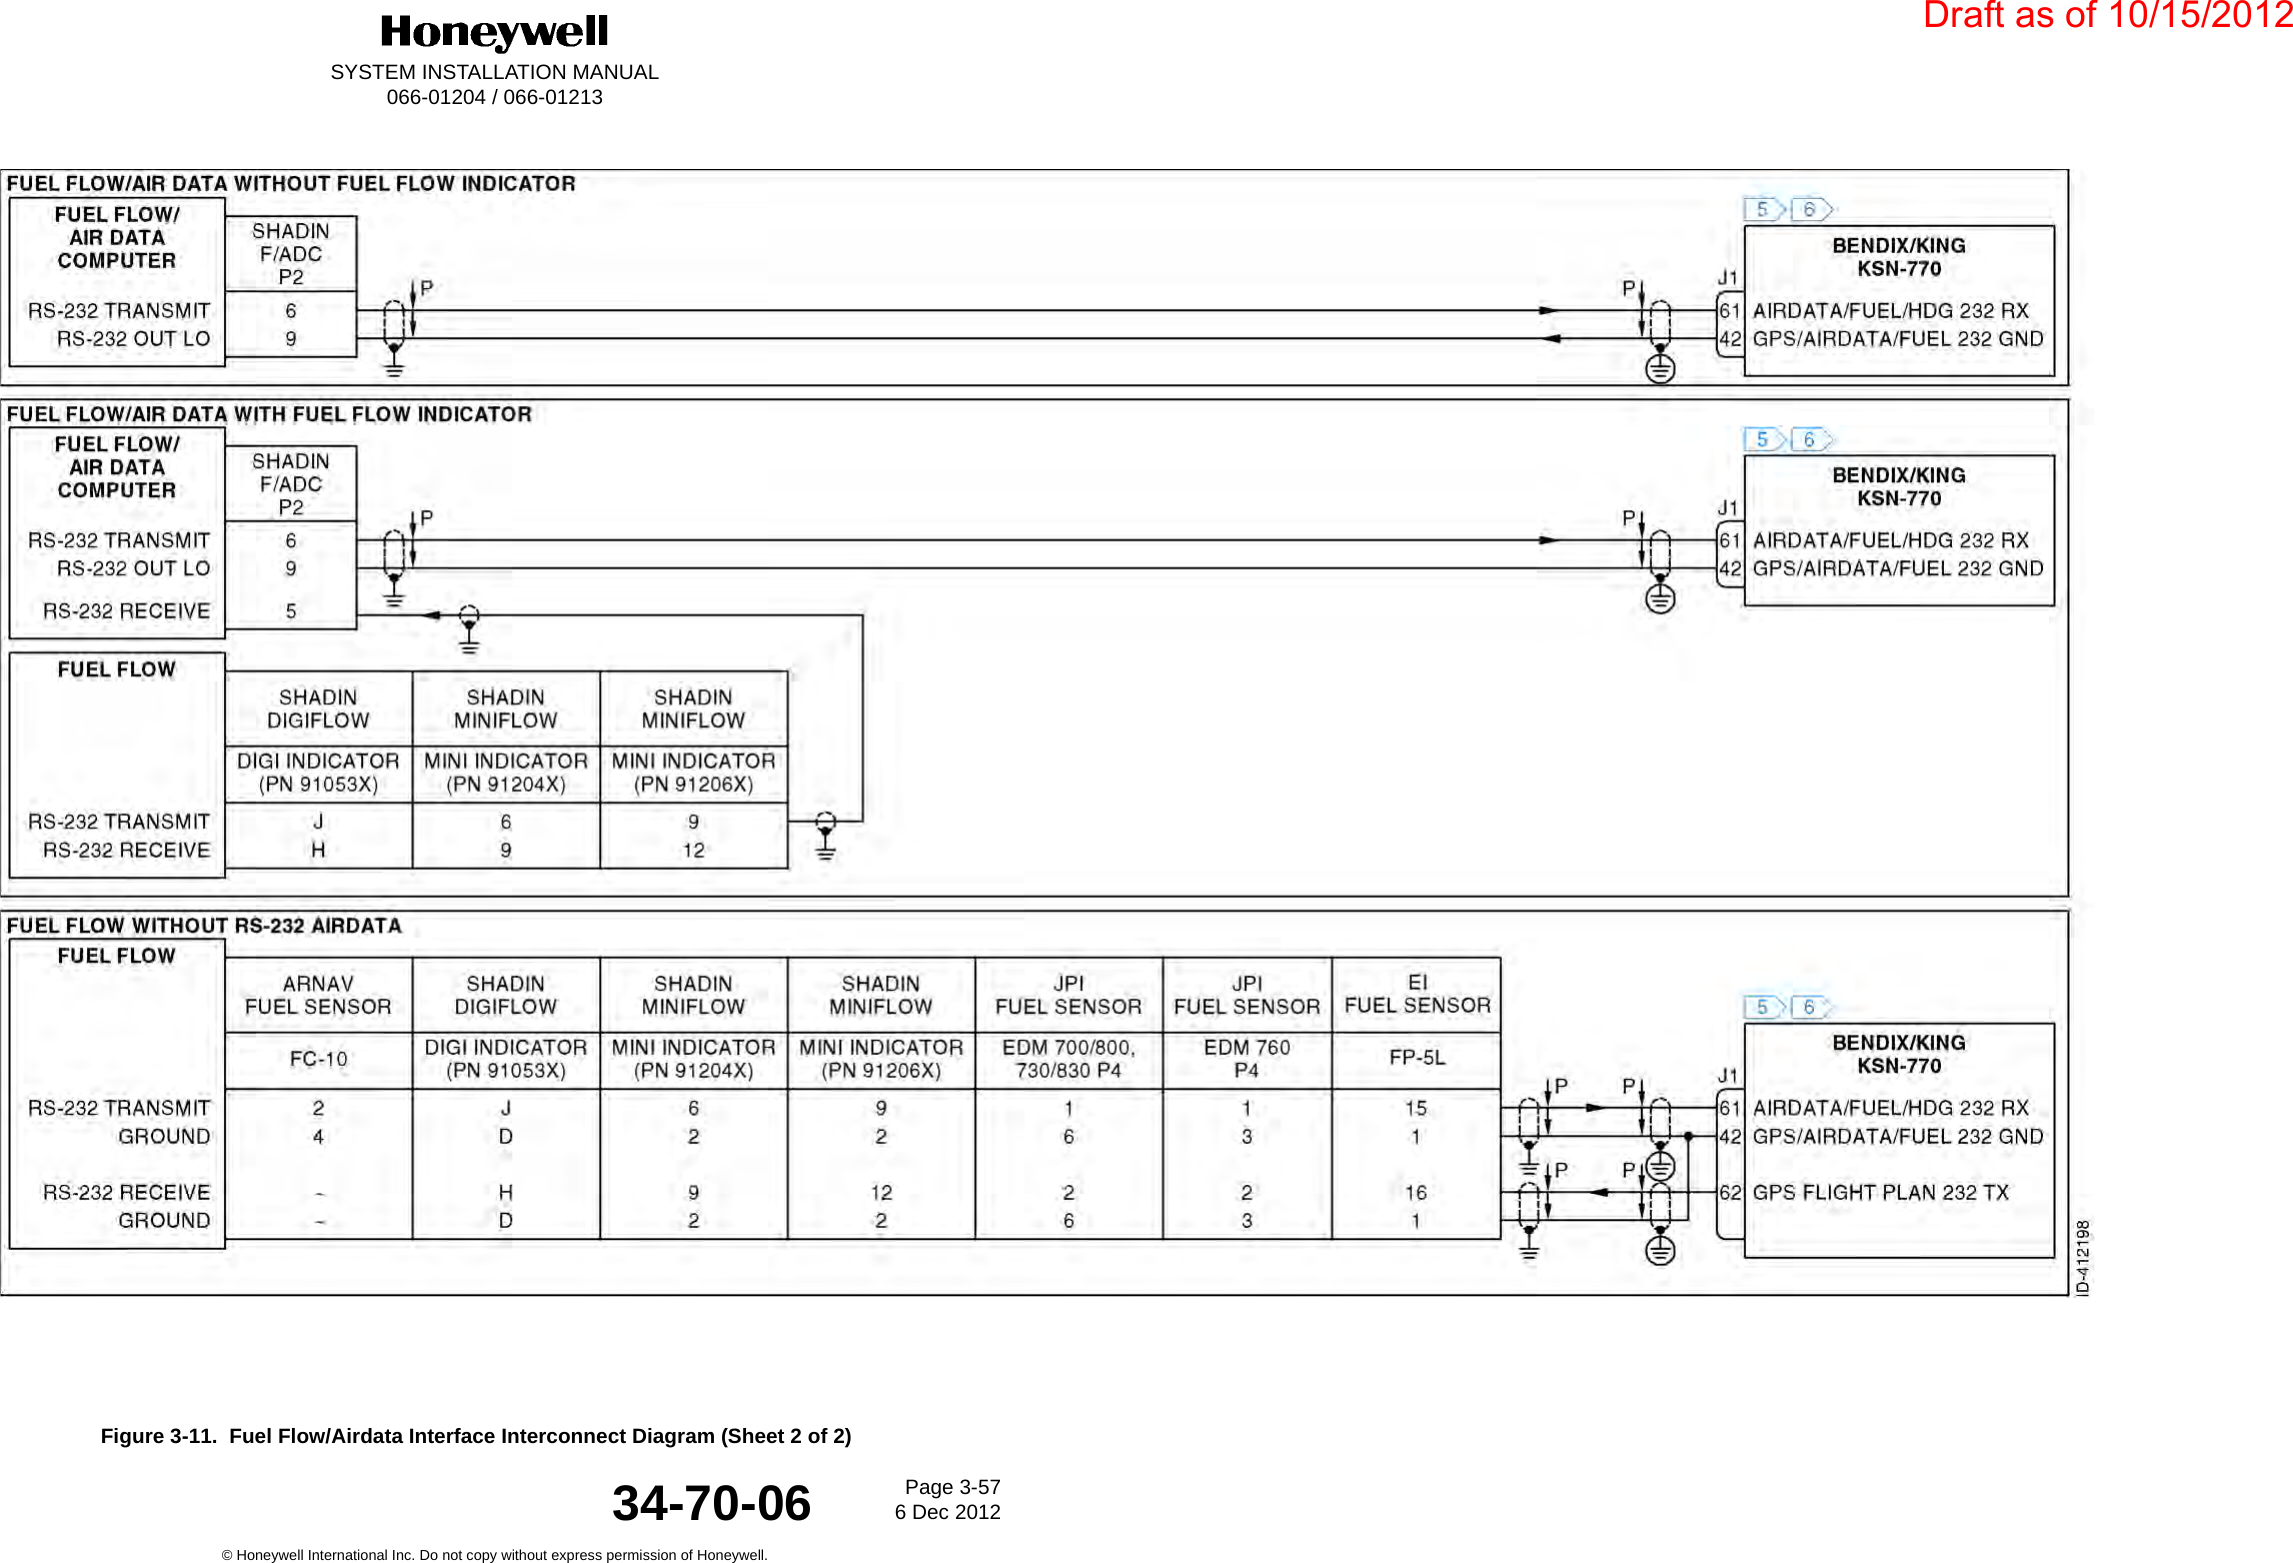 DraftSYSTEM INSTALLATION MANUAL066-01204 / 066-01213Page 3-576 Dec 2012© Honeywell International Inc. Do not copy without express permission of Honeywell.34-70-06Figure 3-11.  Fuel Flow/Airdata Interface Interconnect Diagram (Sheet 2 of 2)Draft as of 10/15/2012